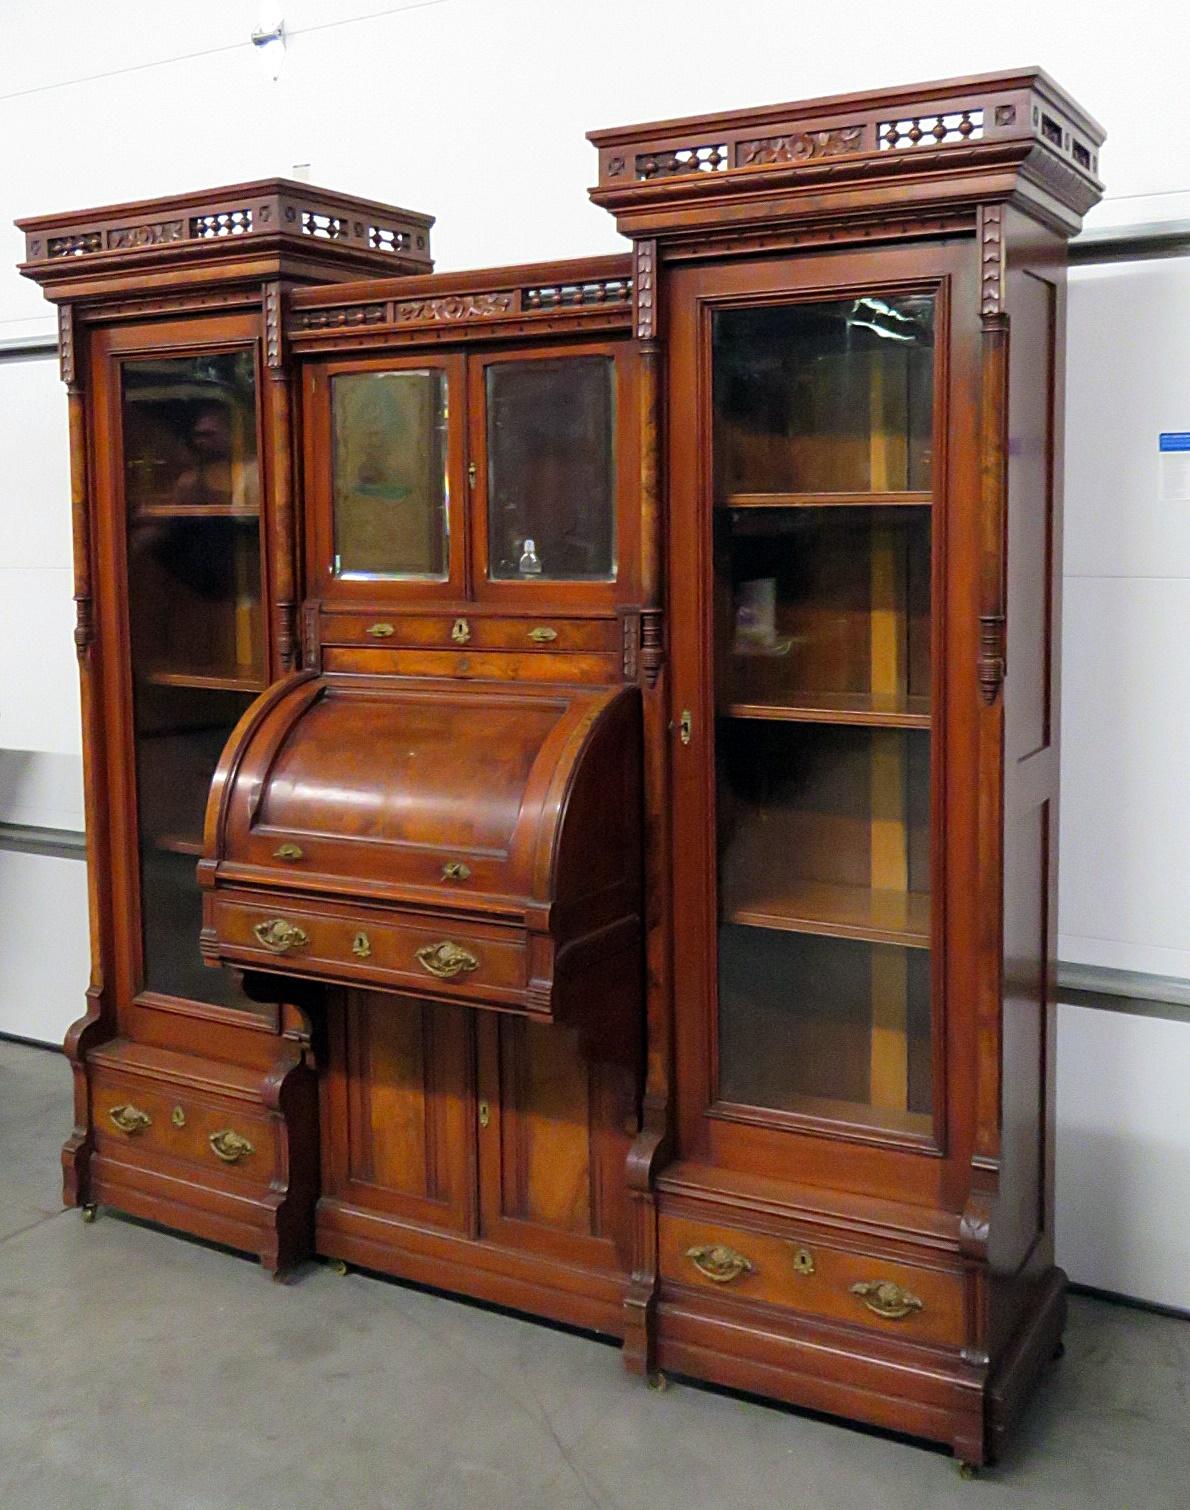 Rare Victorian 3-piece cylinder desk on casters. The side bookcases each have 1 door with 3 shelves over 1 drawer. The center has 4 doors, 1 drawer and secretary desk.